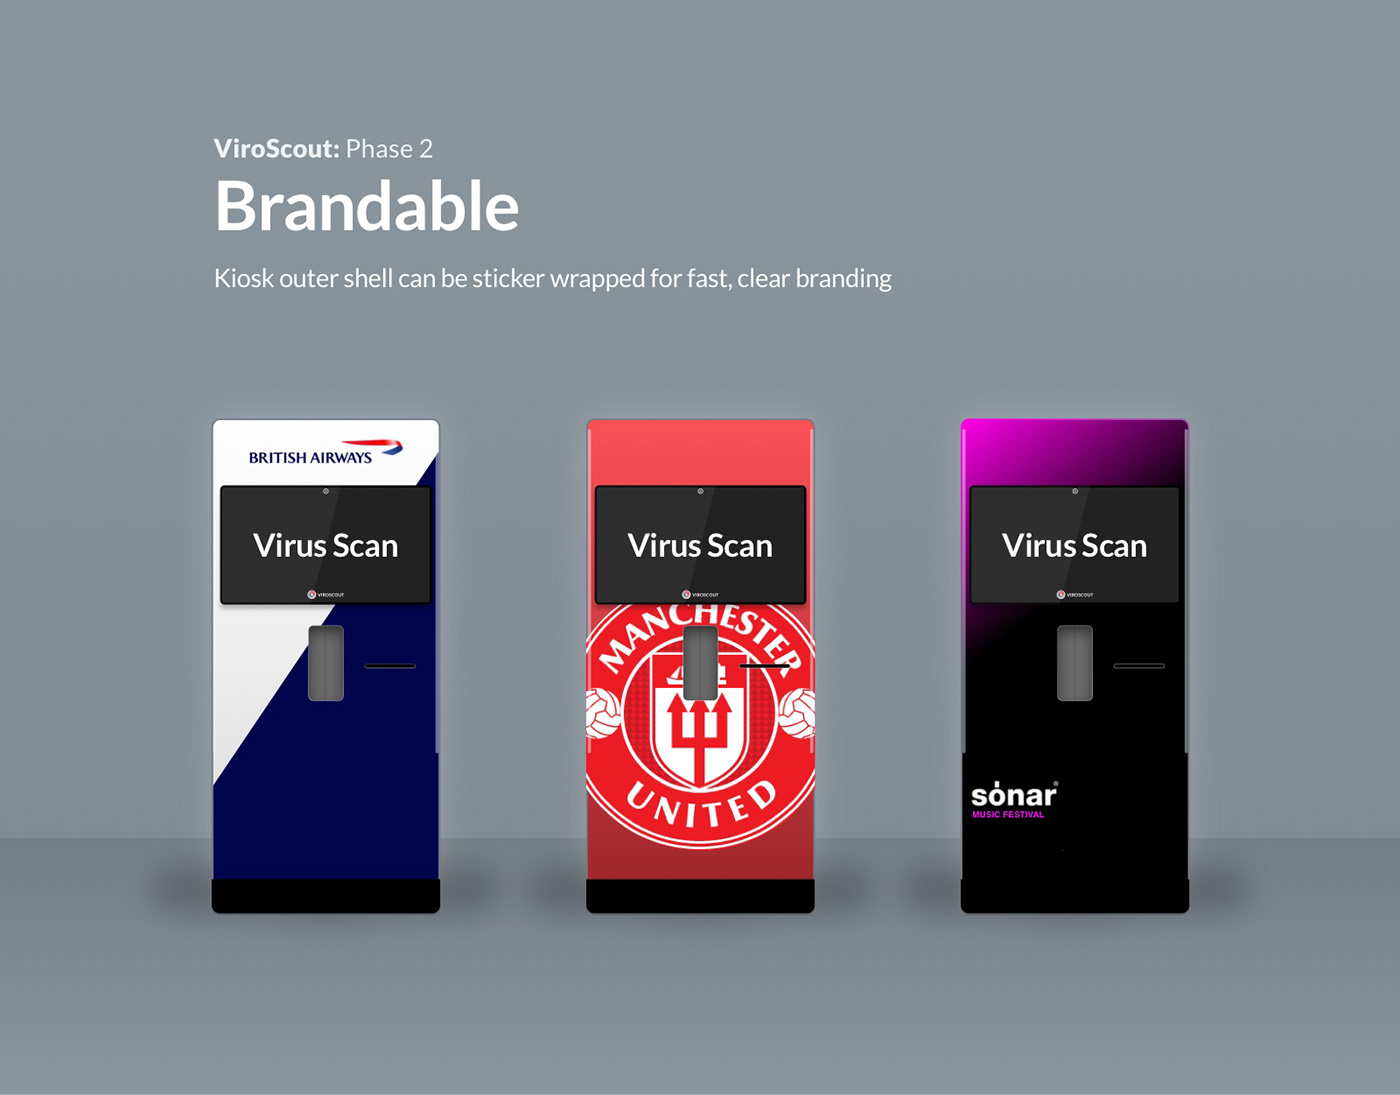 A mock-up of VirusScout Kiosk with 3 branded examples: British Airways, Manchester United & Sonar